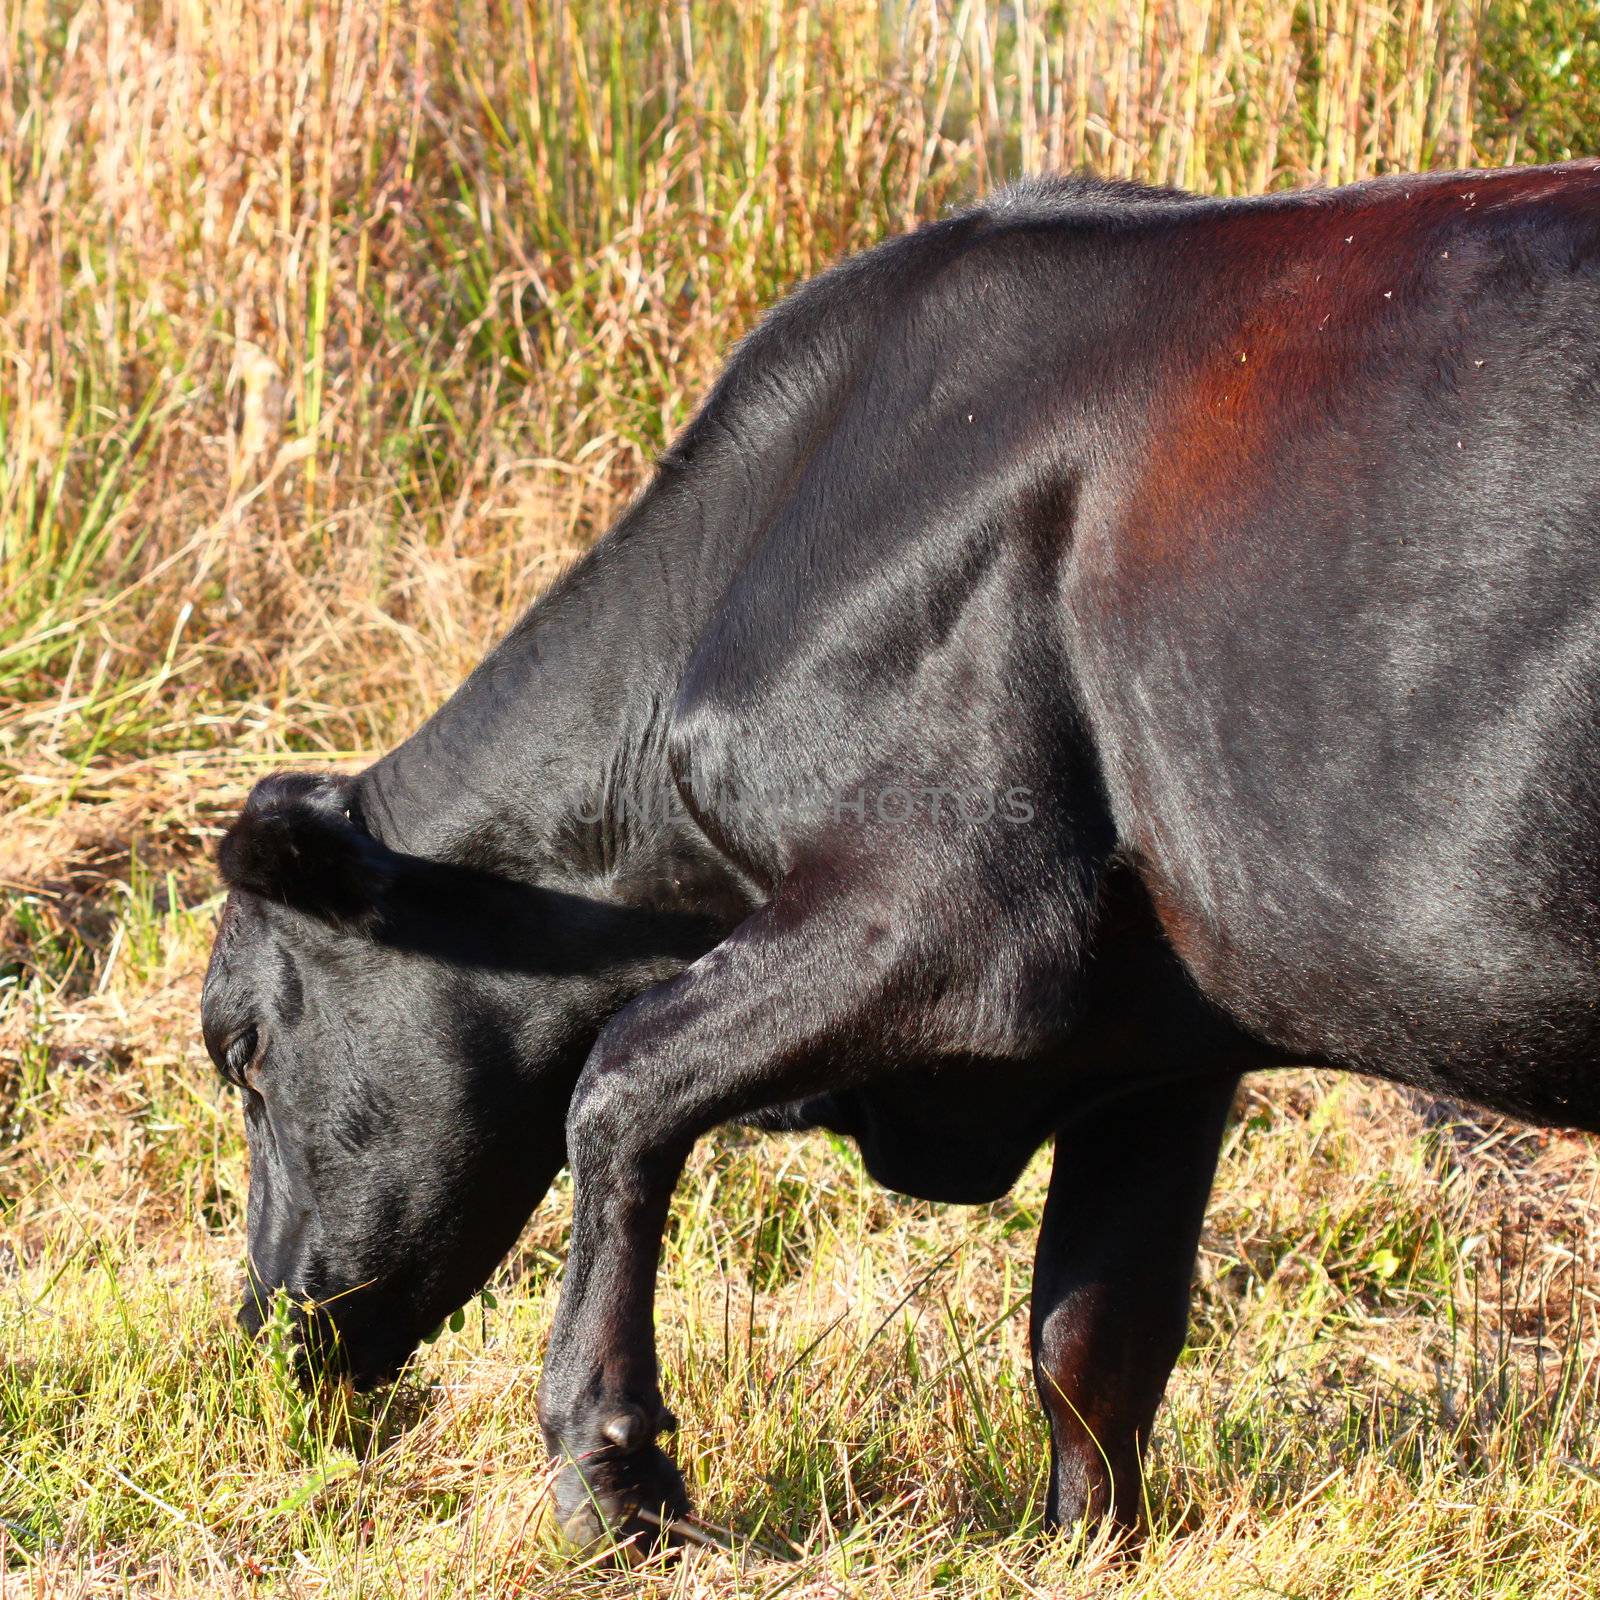 A large cow grazes on grass in central Florida.